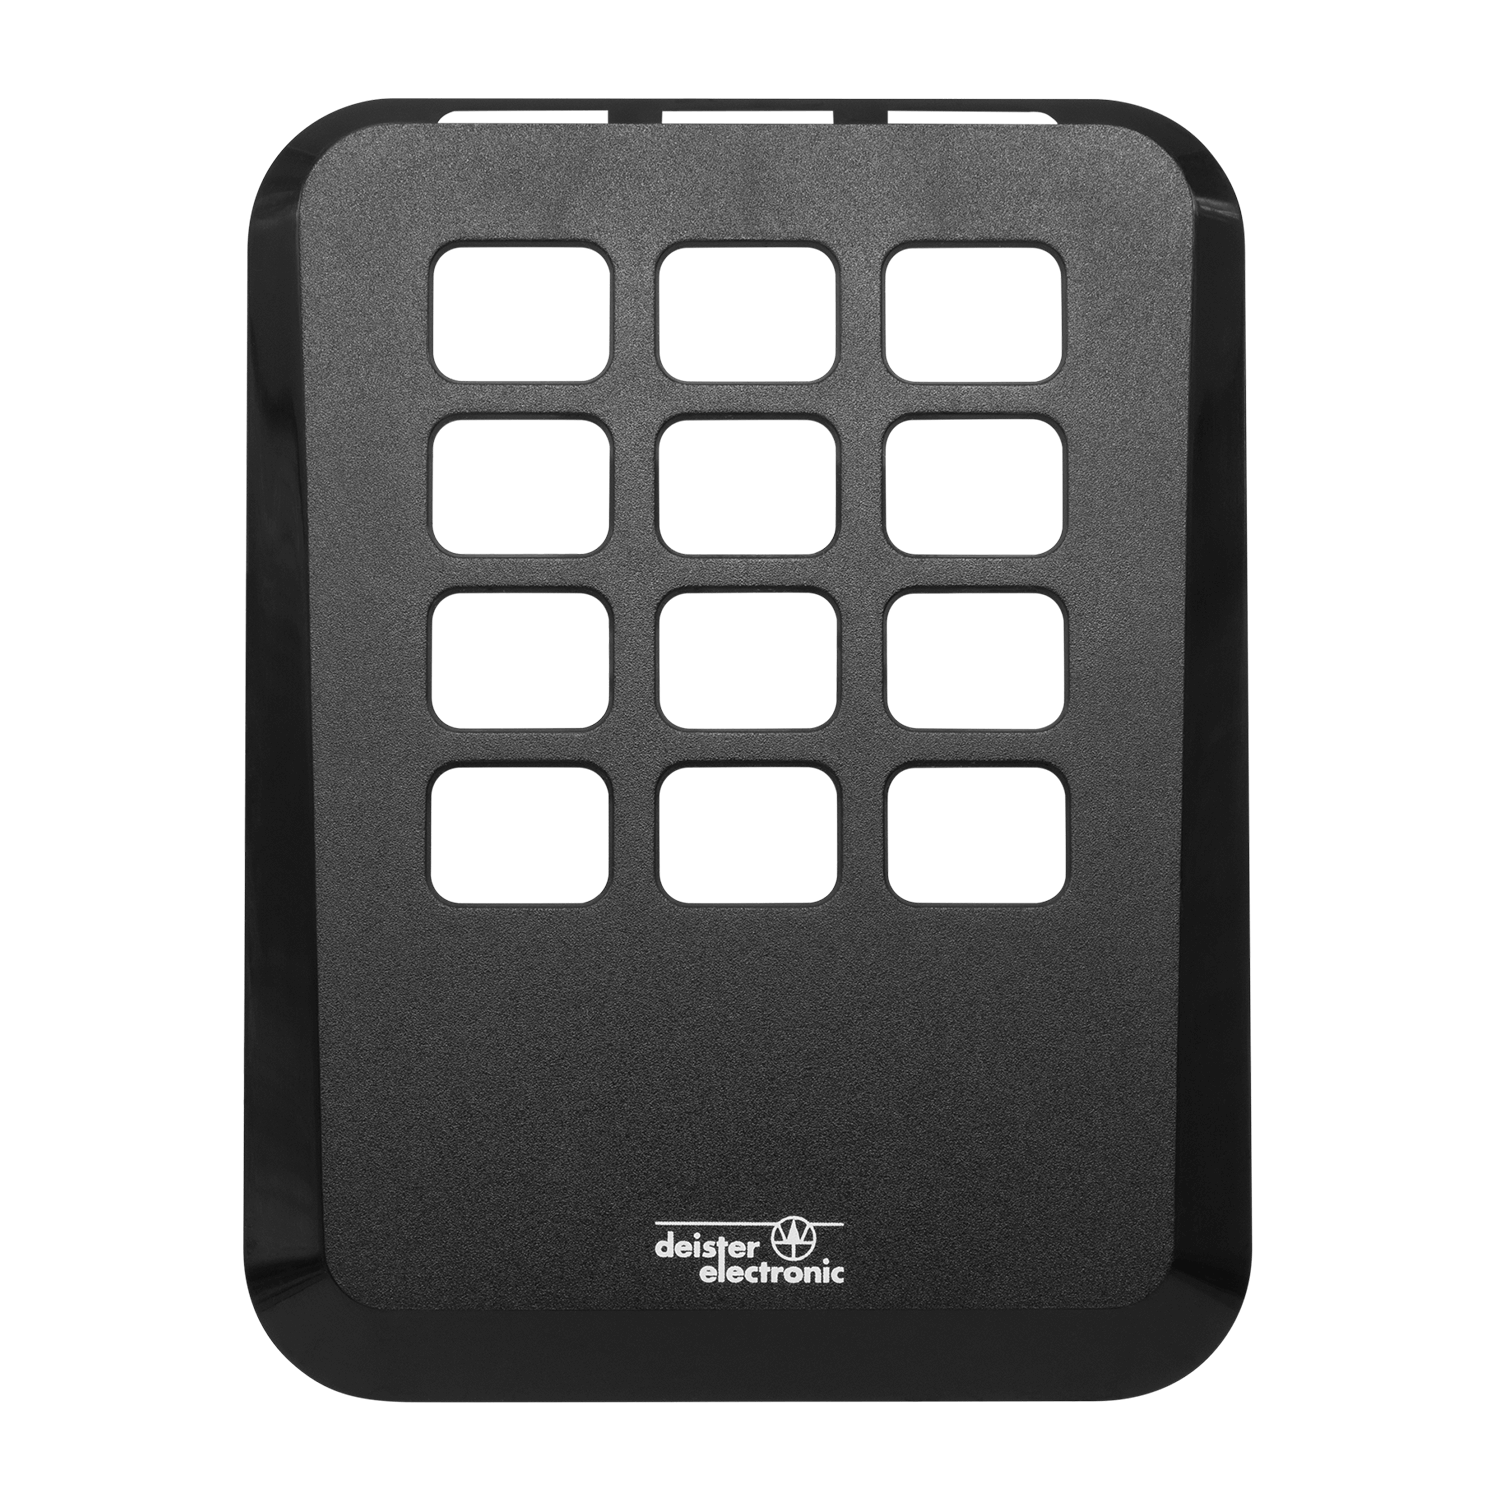 CKL 6 black cover for access control reader with keypad, long version